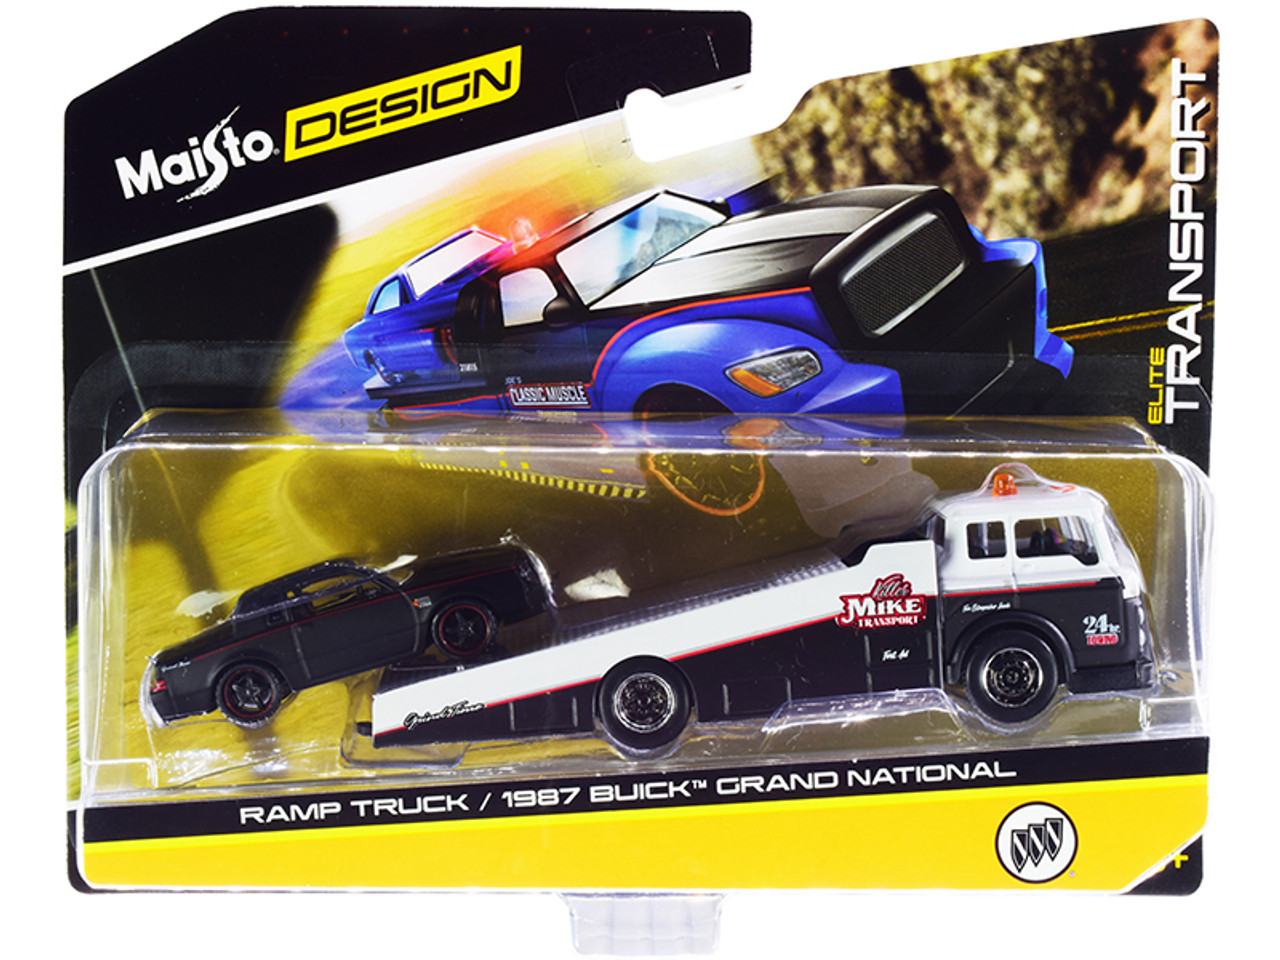 1987 Buick Grand National Matt Black with Red Stripes and Ramp Truck Black and White "Elite Transport" Series 1/64 Diecast Models by Maisto